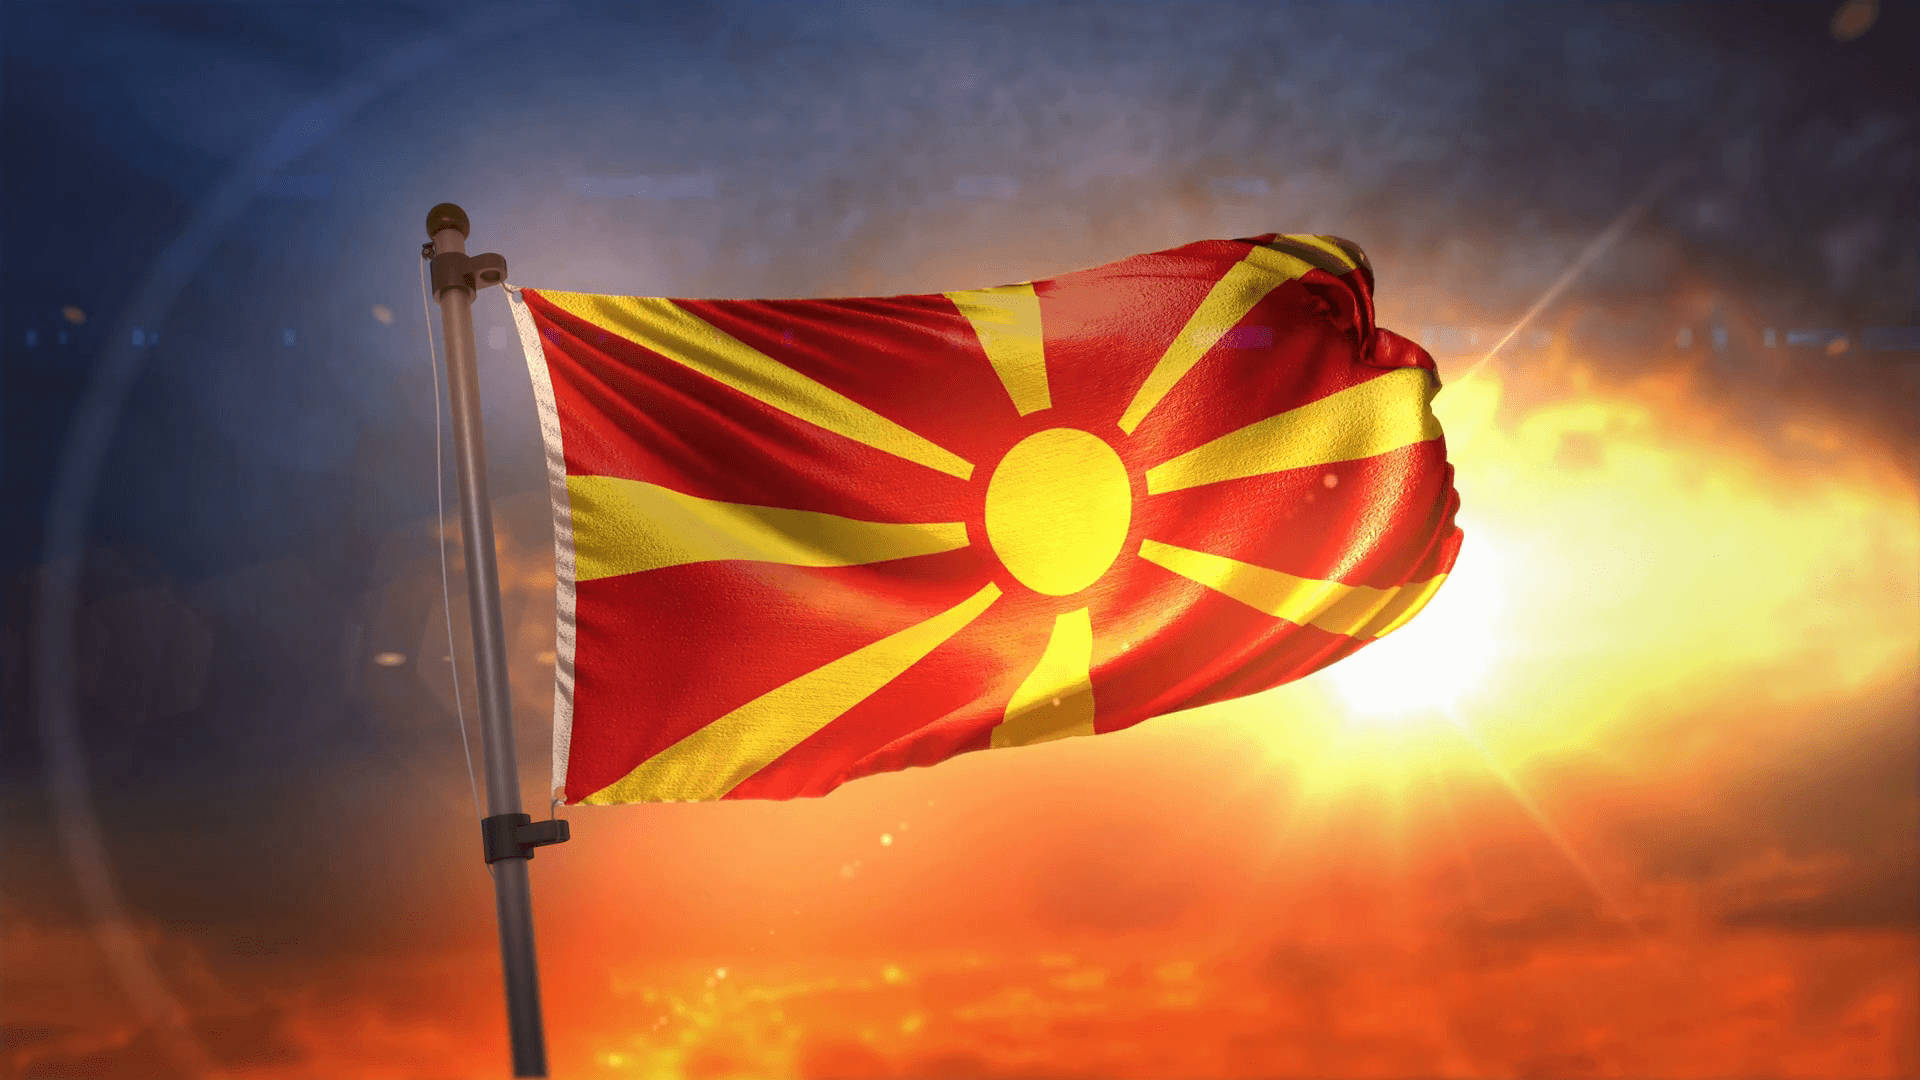 Macedonia Flag Against Bright Sun Picture